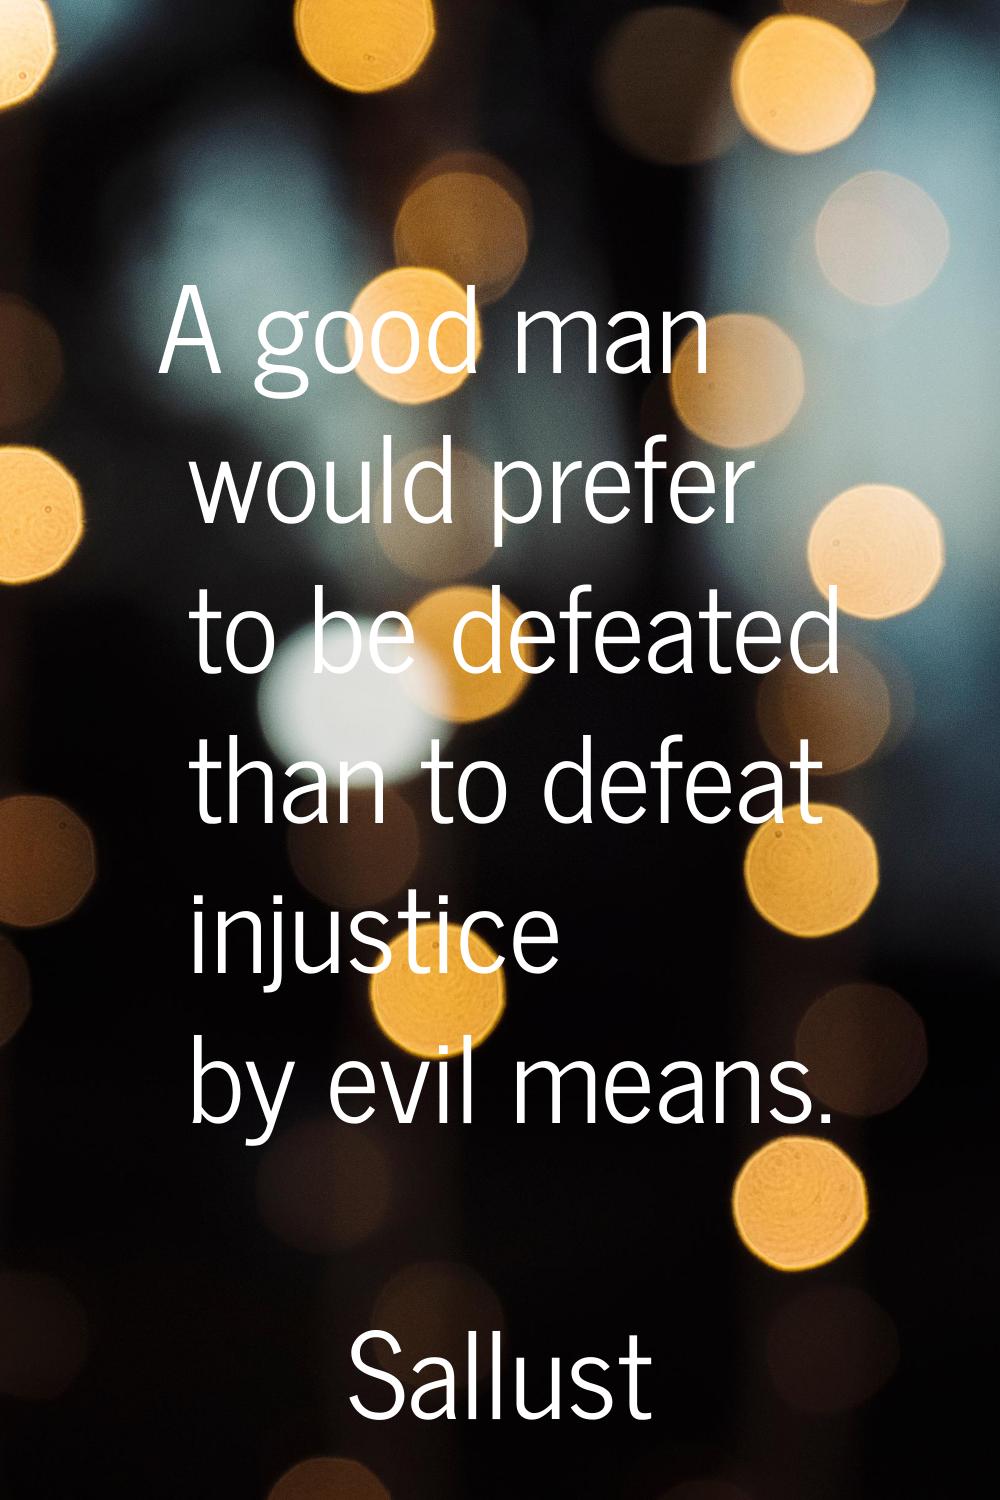 A good man would prefer to be defeated than to defeat injustice by evil means.